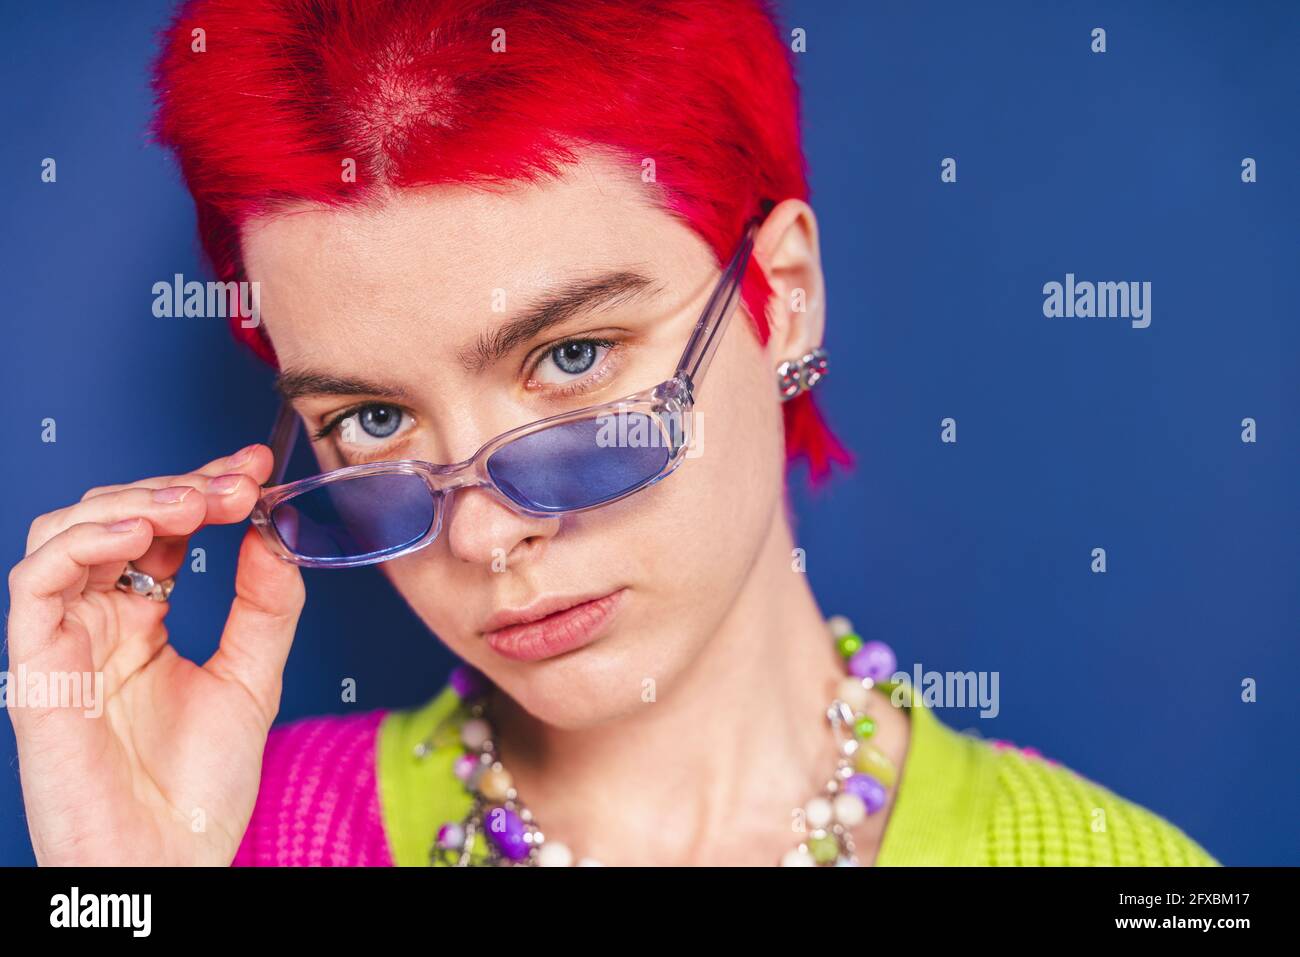 Woman with sunglasses in front of blue background Stock Photo